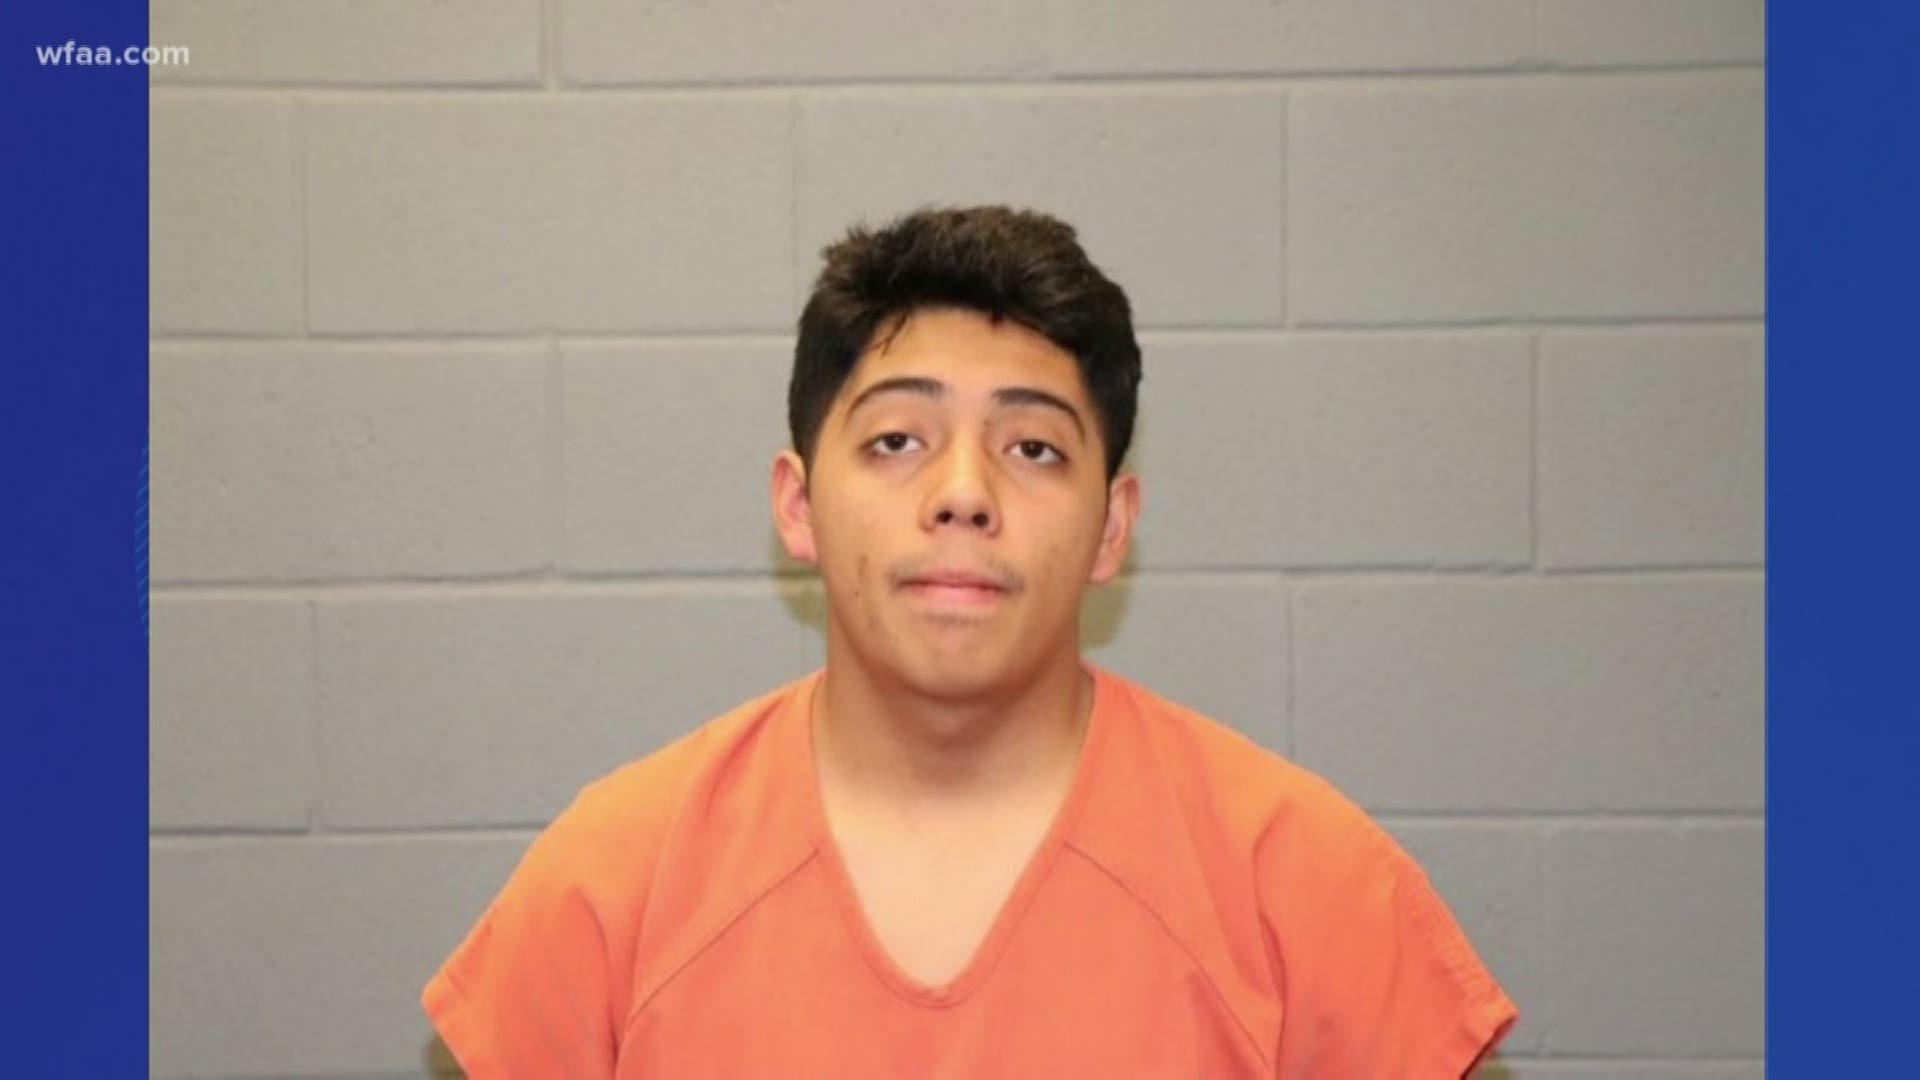 Grapevine police arrested Antony Gonzalez-Acosta on Monday. They say he groped a woman who was walking to her apartment on Mustang Drive.